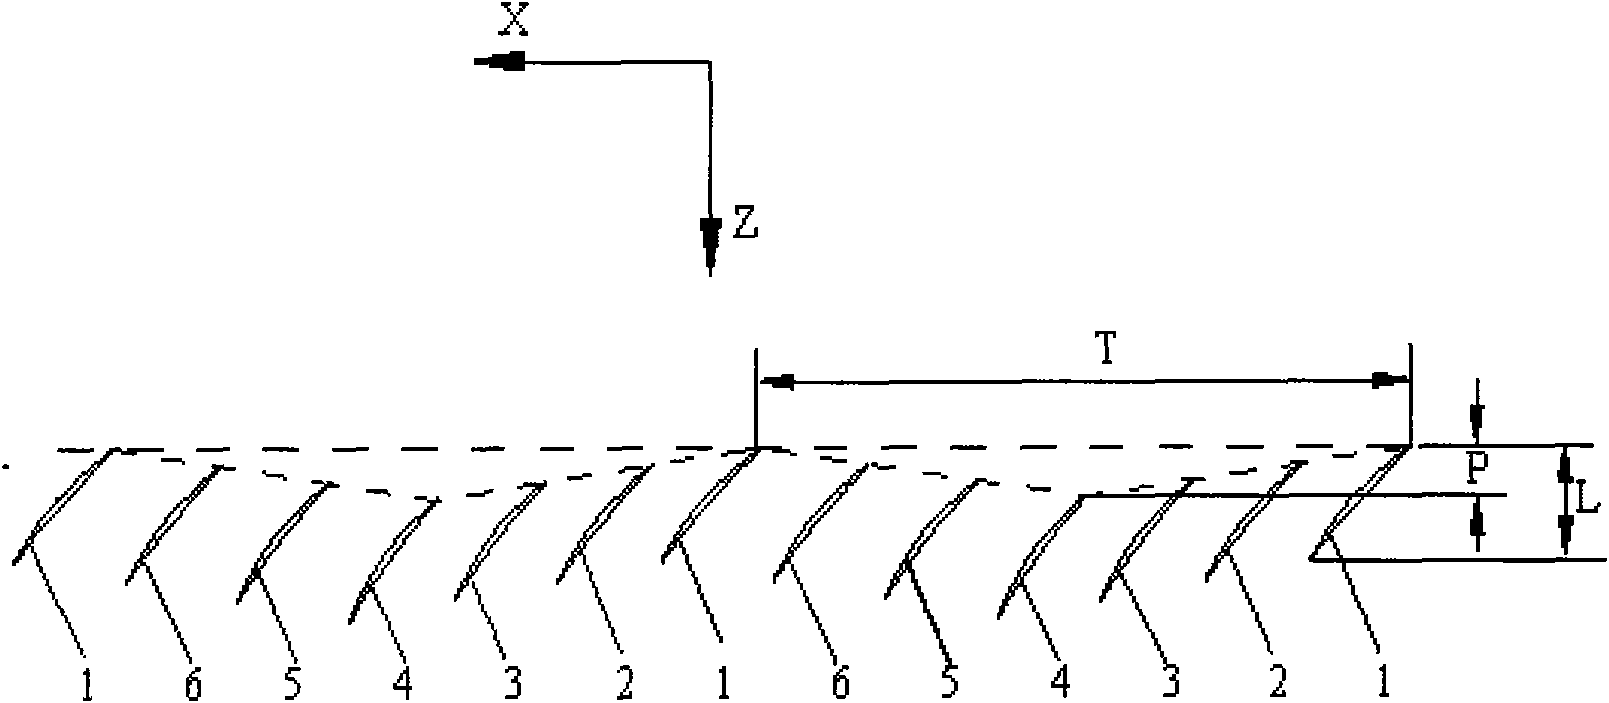 Moving blade row layout capable of improving axial compressor aerodynamic performance